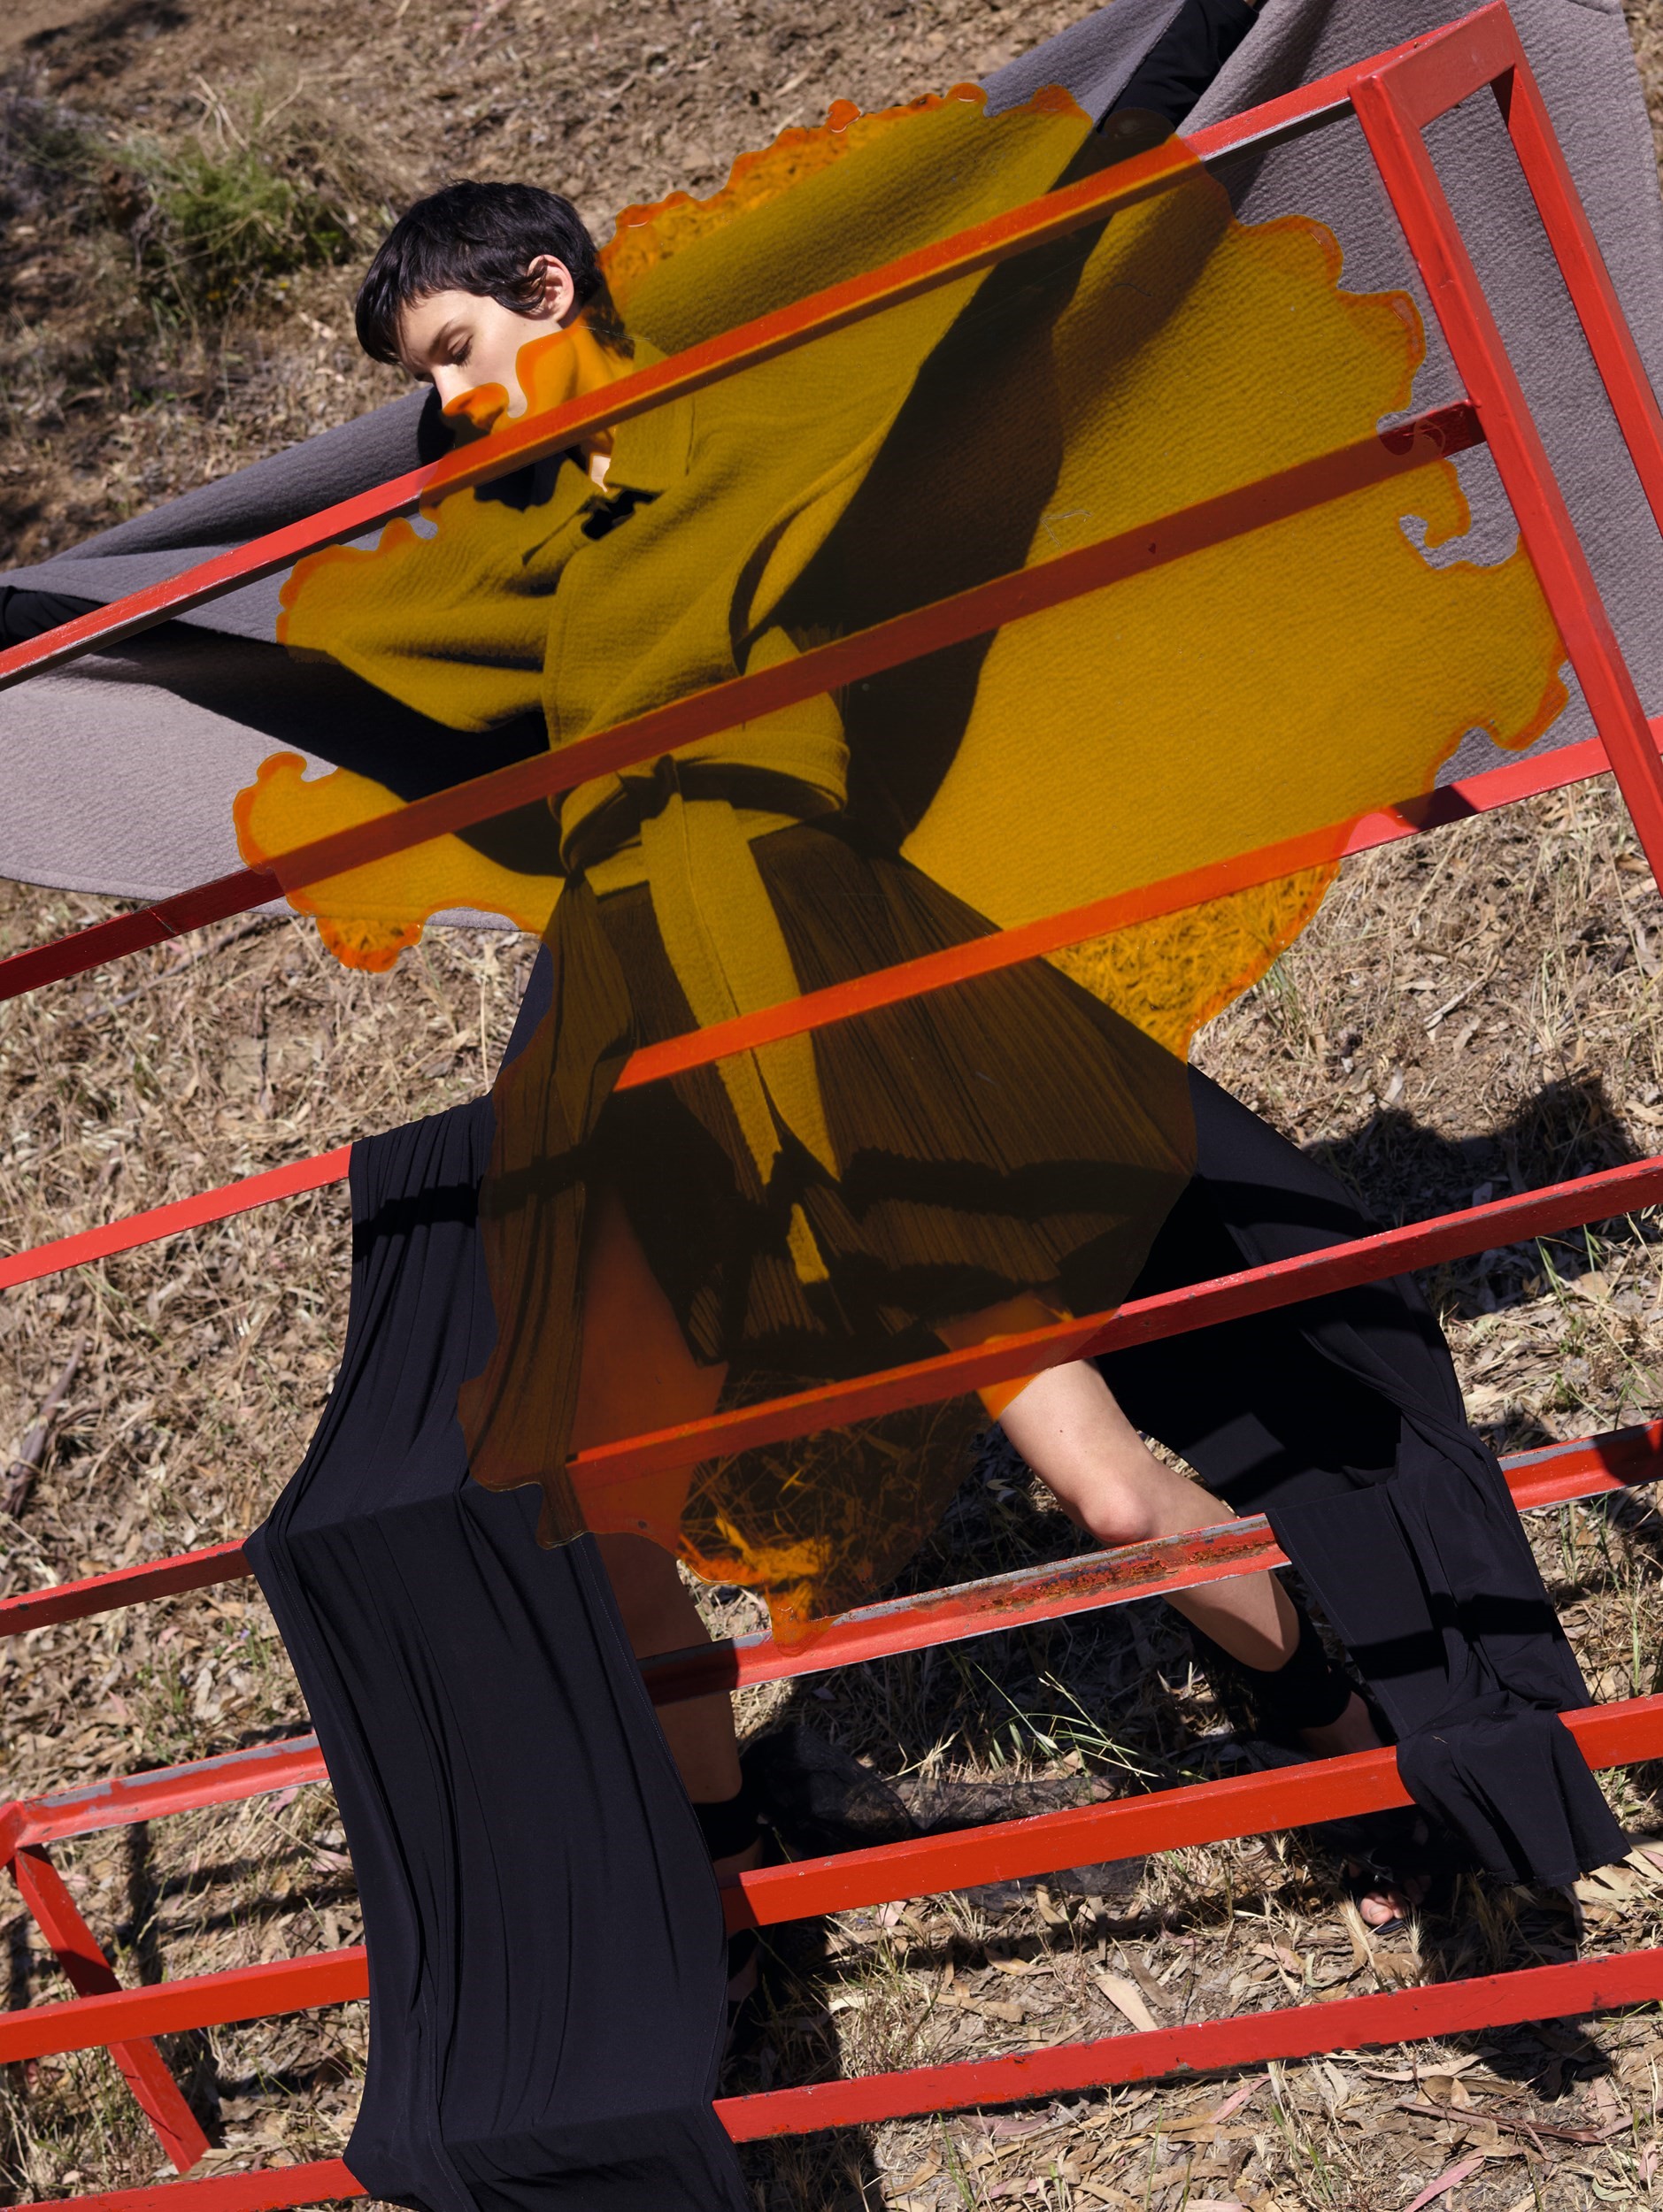 Magical Thinking: An interview with Viviane Sassen on the occasion